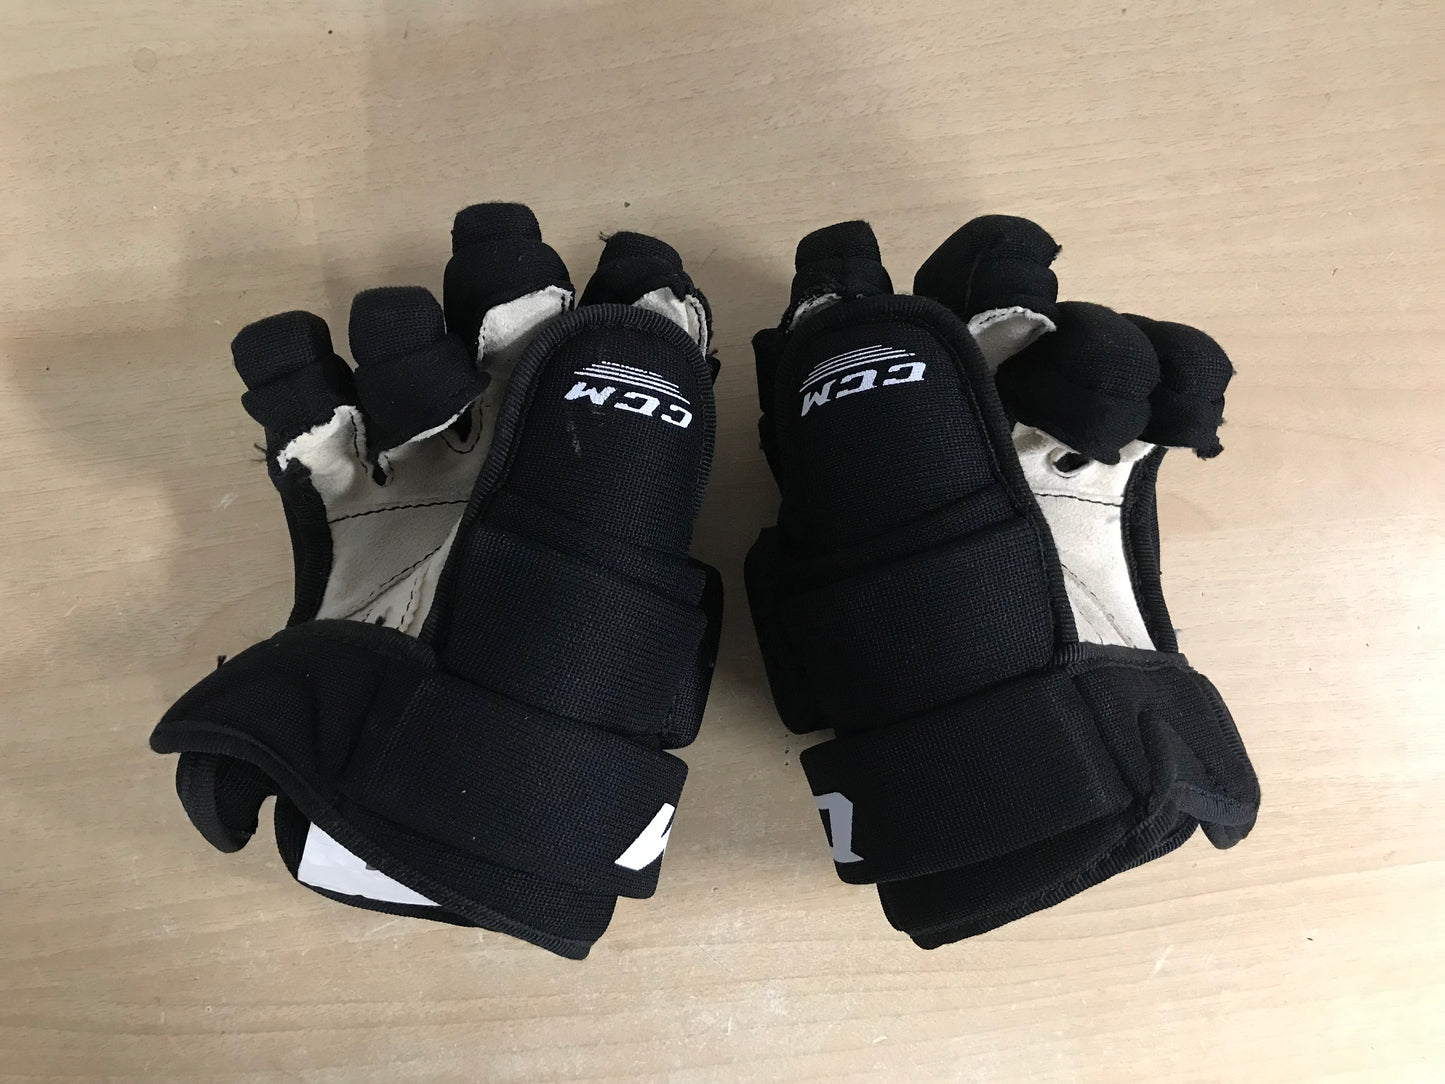 Hockey Gloves Child Size 9 inch CCM Black White As New Excellent